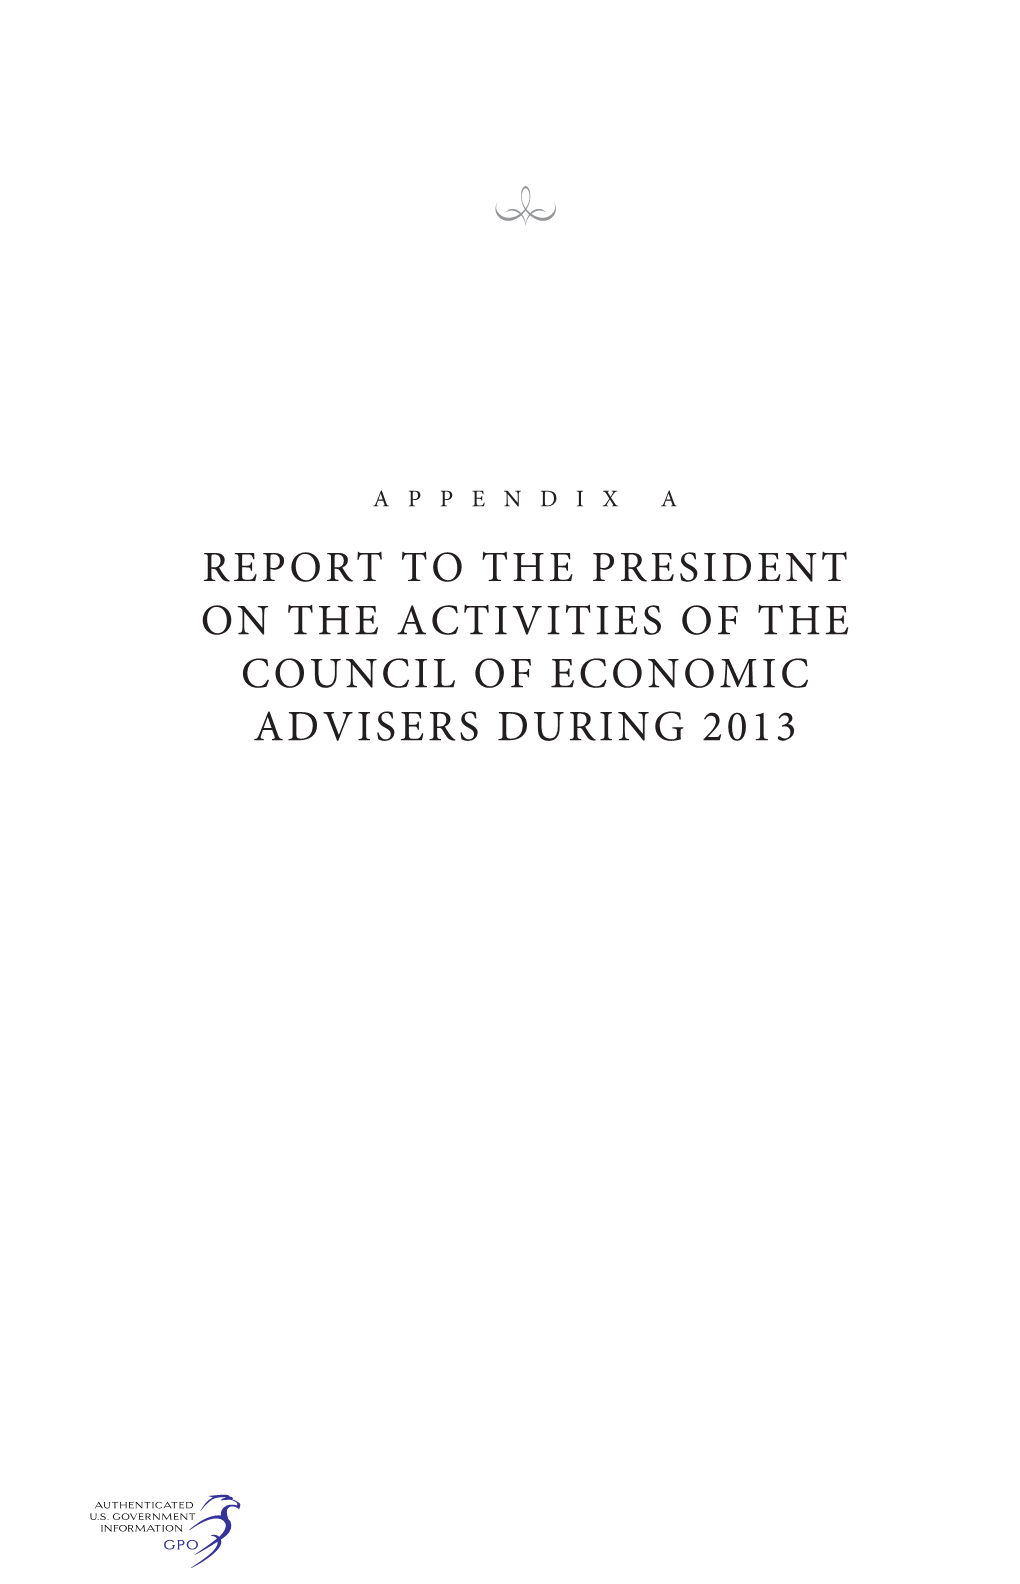 Report to the President on the Activities of the Council of Economic Advisers During 2013